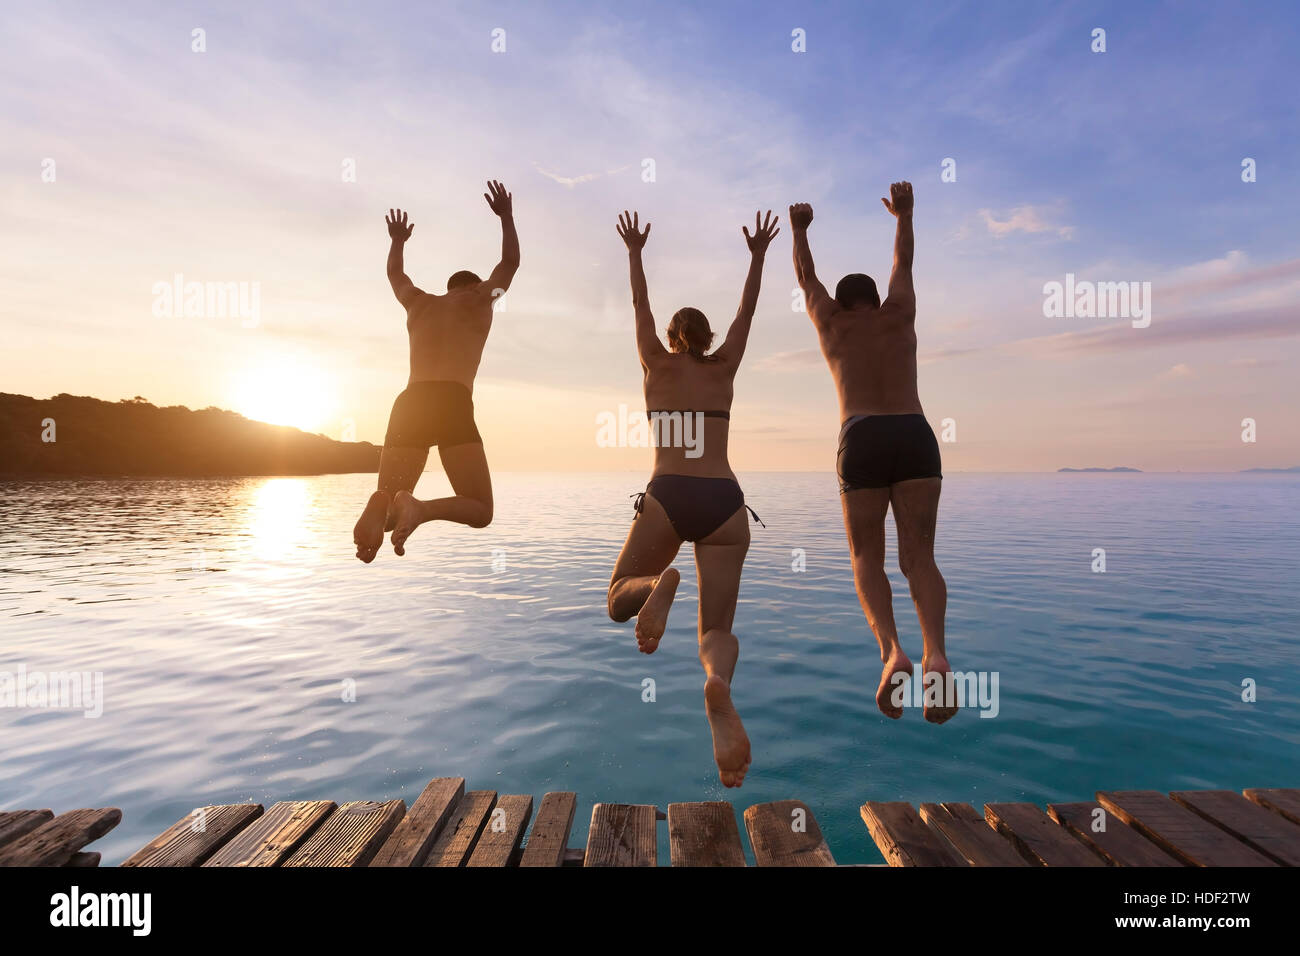 Group of happy people having fun jumping in the sea water from a pier Stock Photo